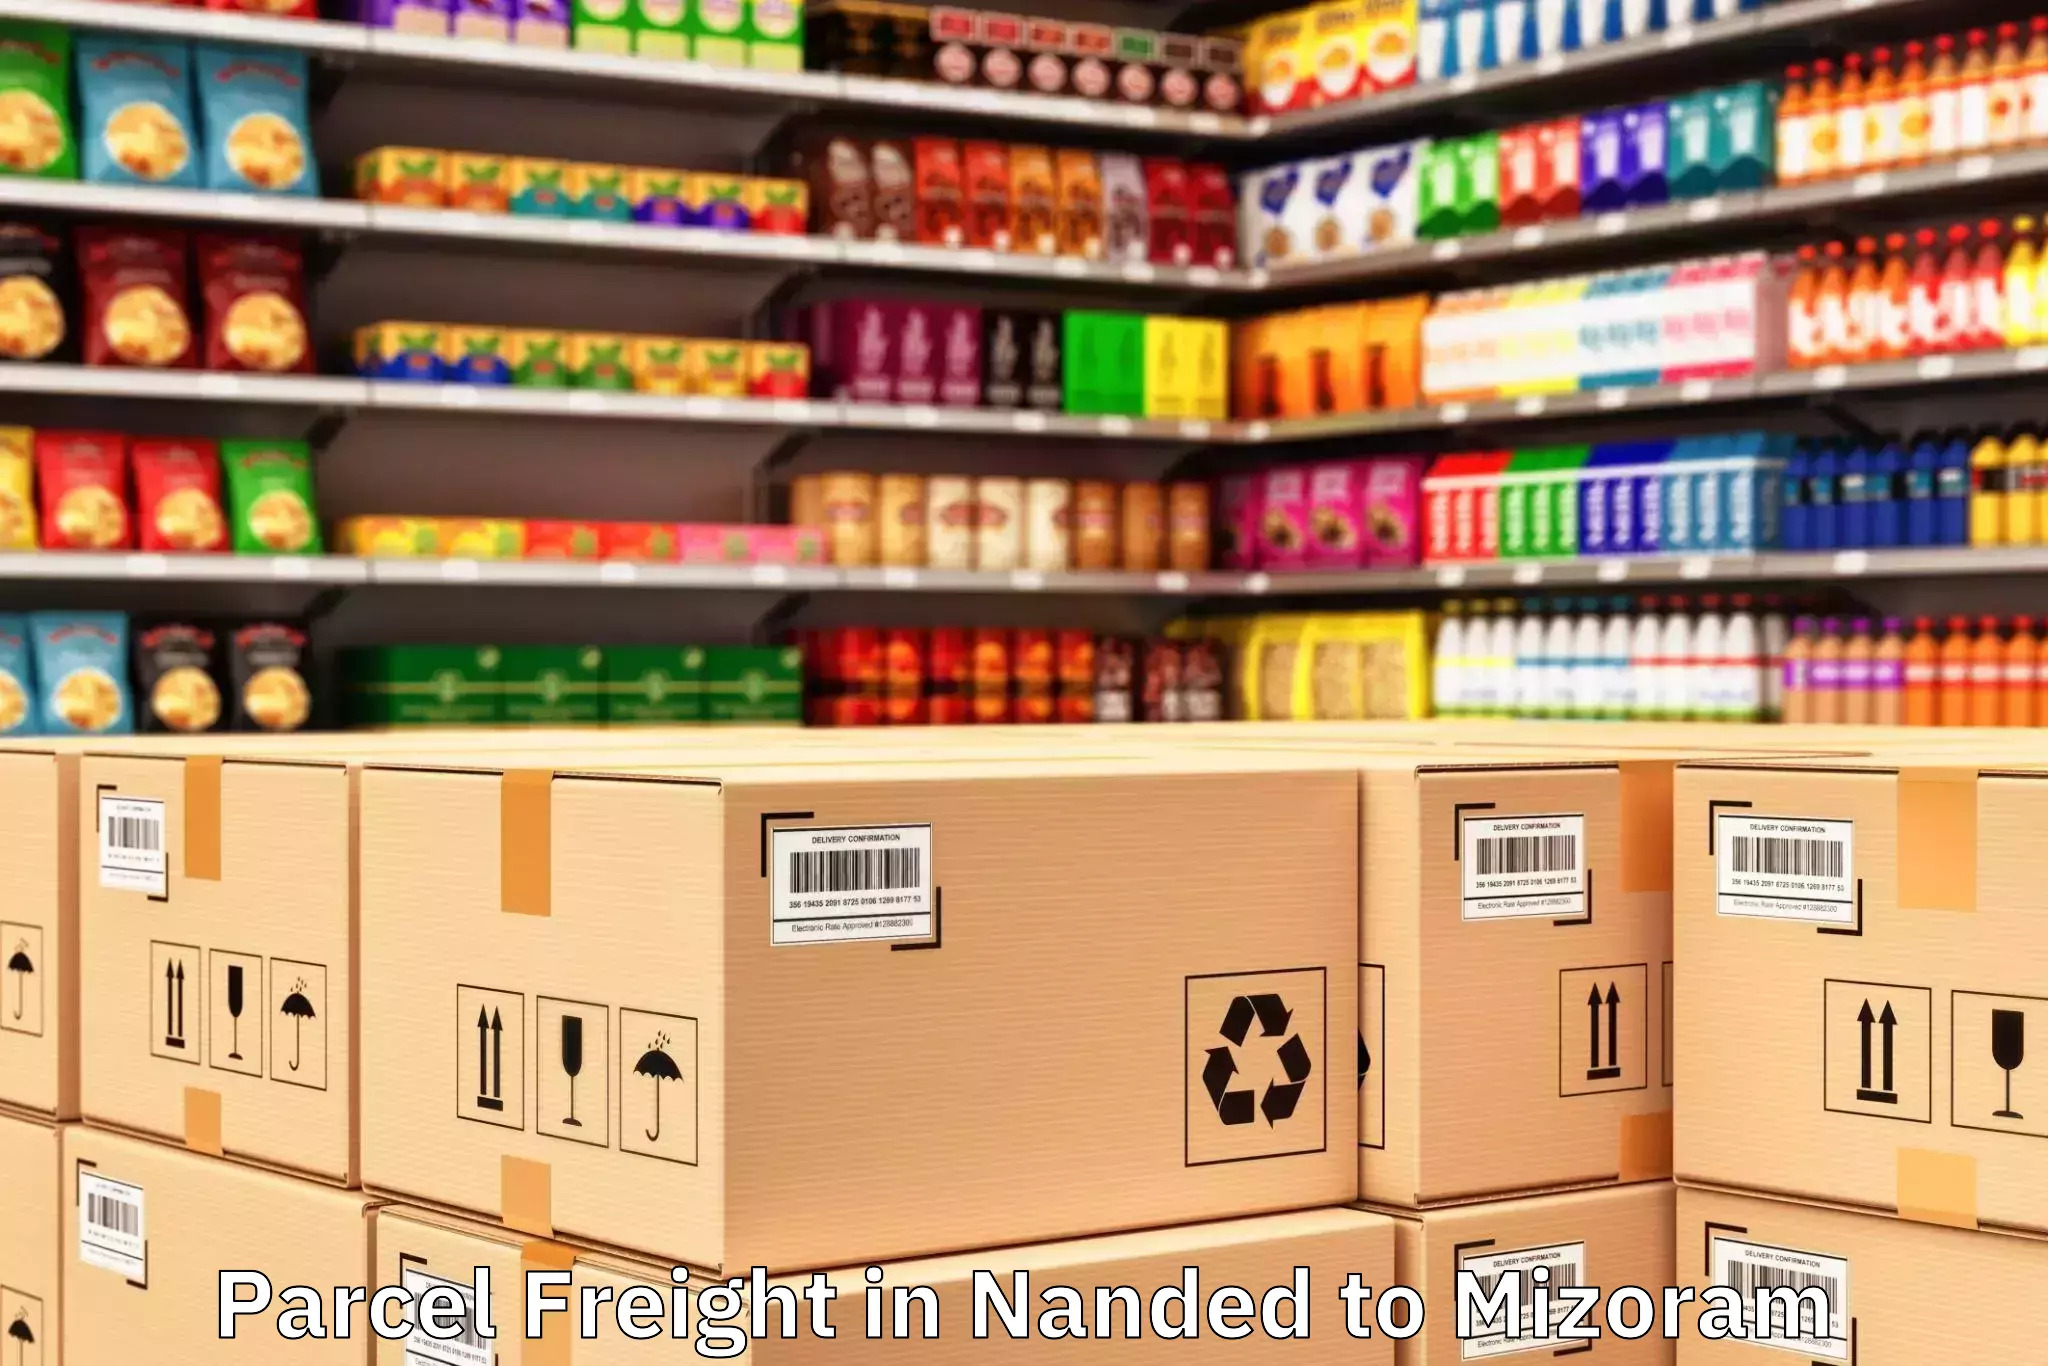 Hassle-Free Nanded to Mizoram Parcel Freight